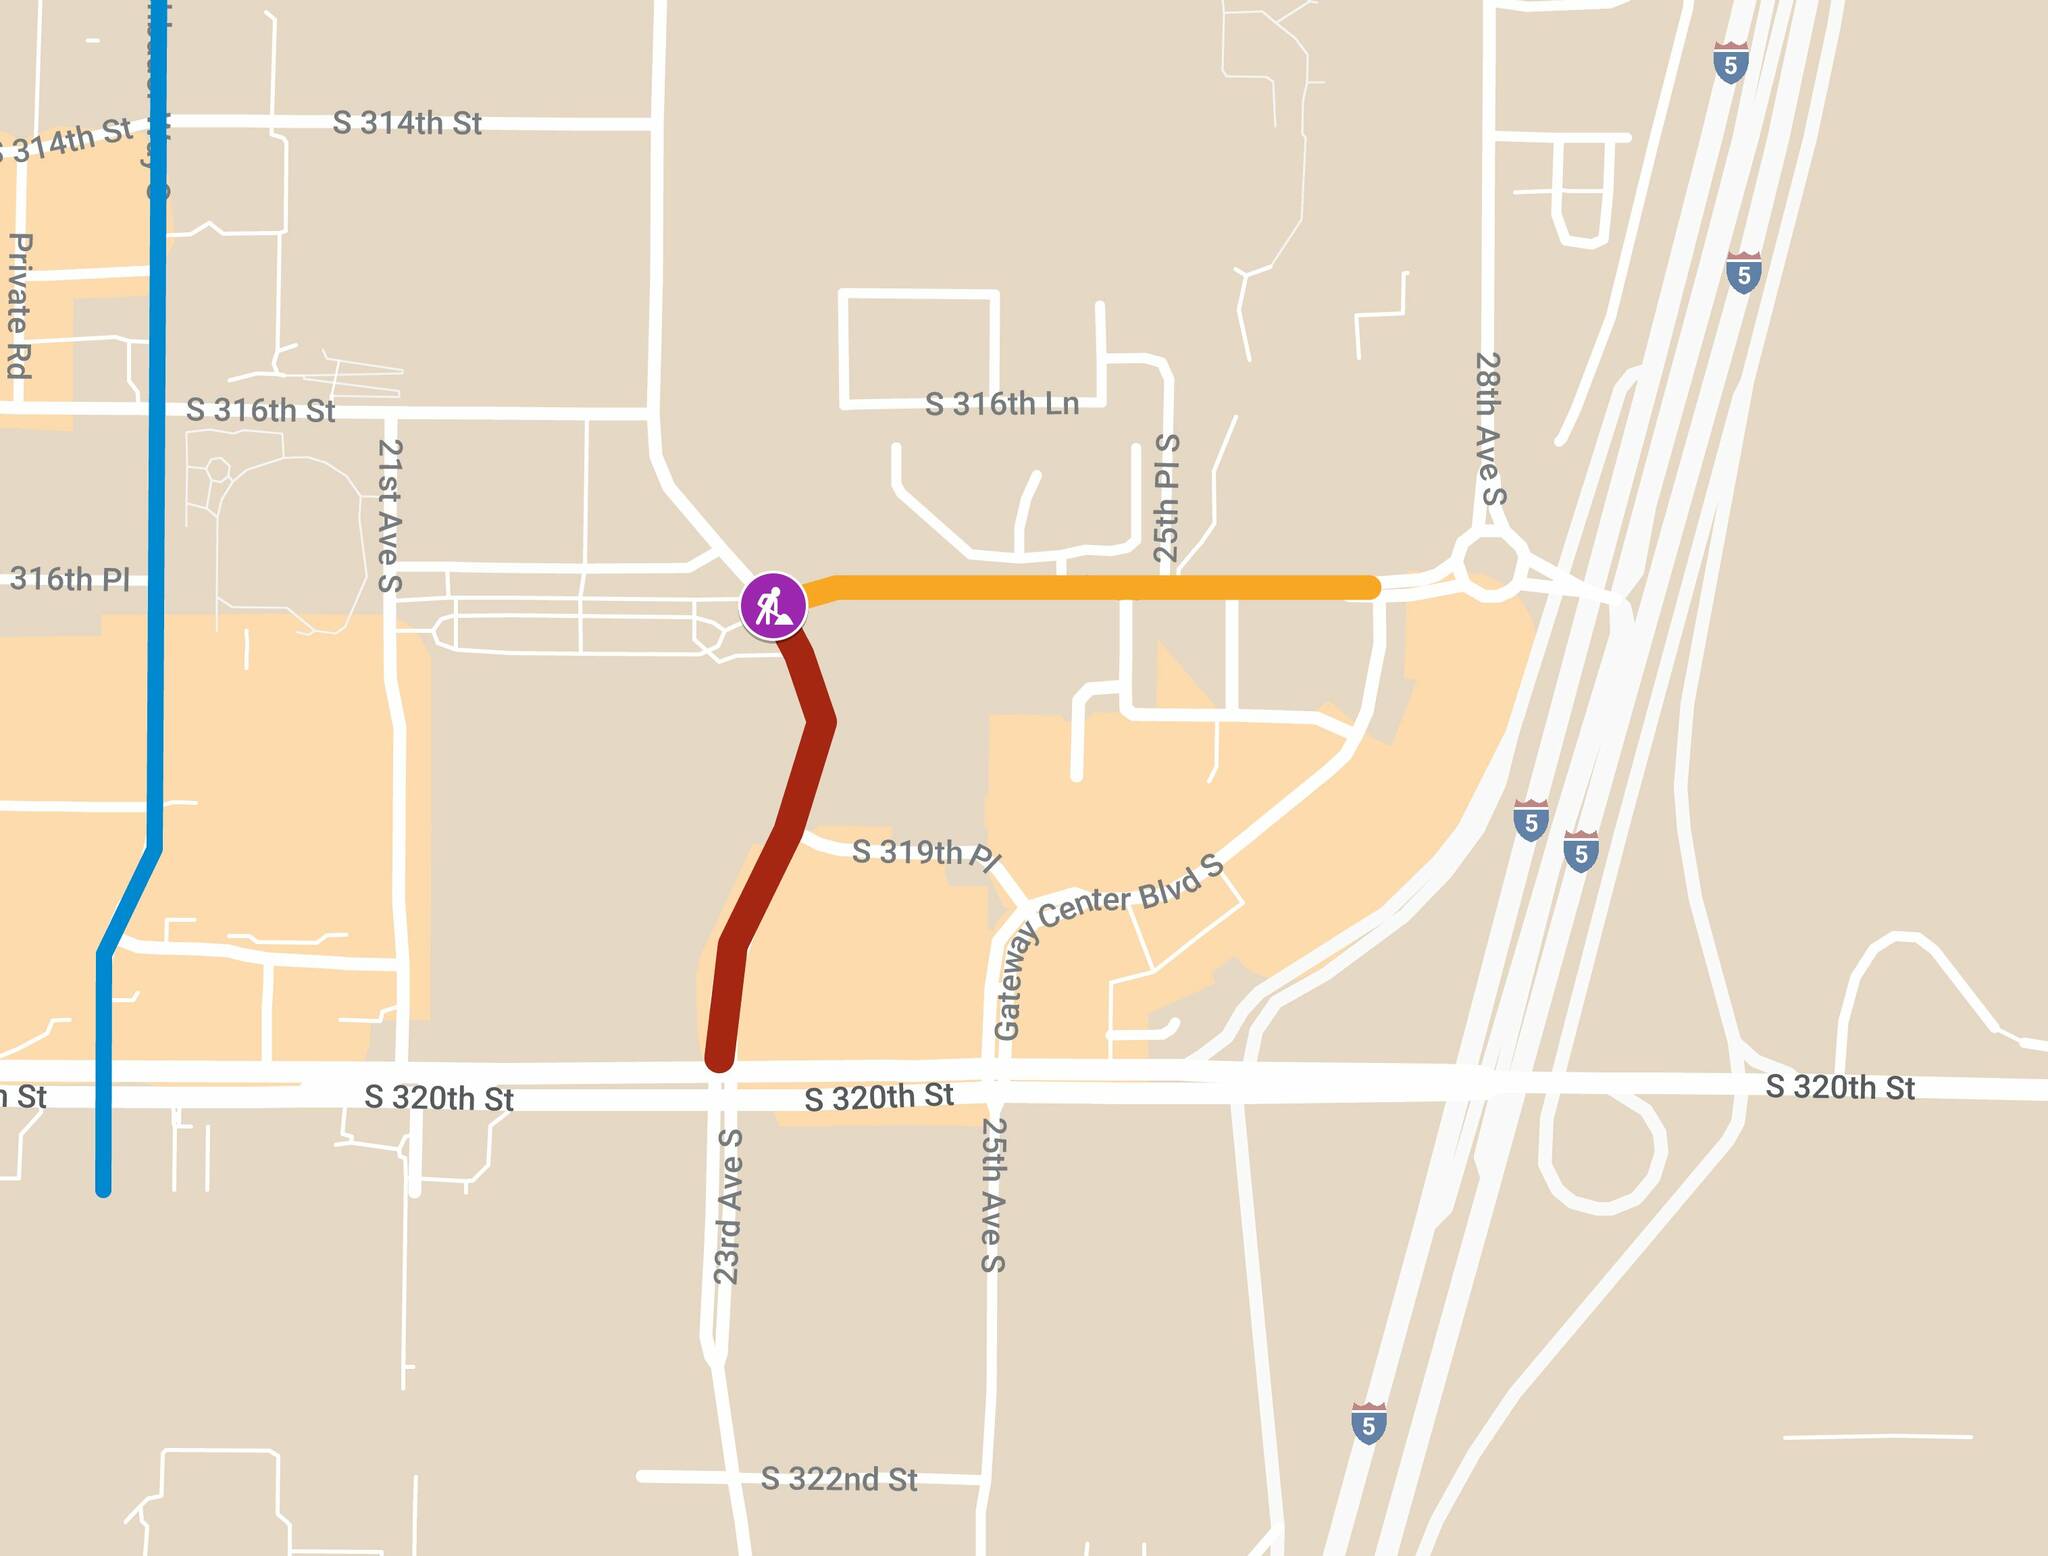 This map shows some of the changes coming to the transit center area. Part of 23rd Avenue S (highlighted in red) will become northbound only. South 317th Street (orange) will have its center turn lane eliminated. Pete von Reichbauer Way South (blue) will be restriped to expand road capacity. And a new roundabout (purple) will be installed at the 23rd Avenue South / S 317th Street intersection by the end of the year. Image visualized using Google My Maps, using information from Sound Transit. Alex Bruell / The Mirror.